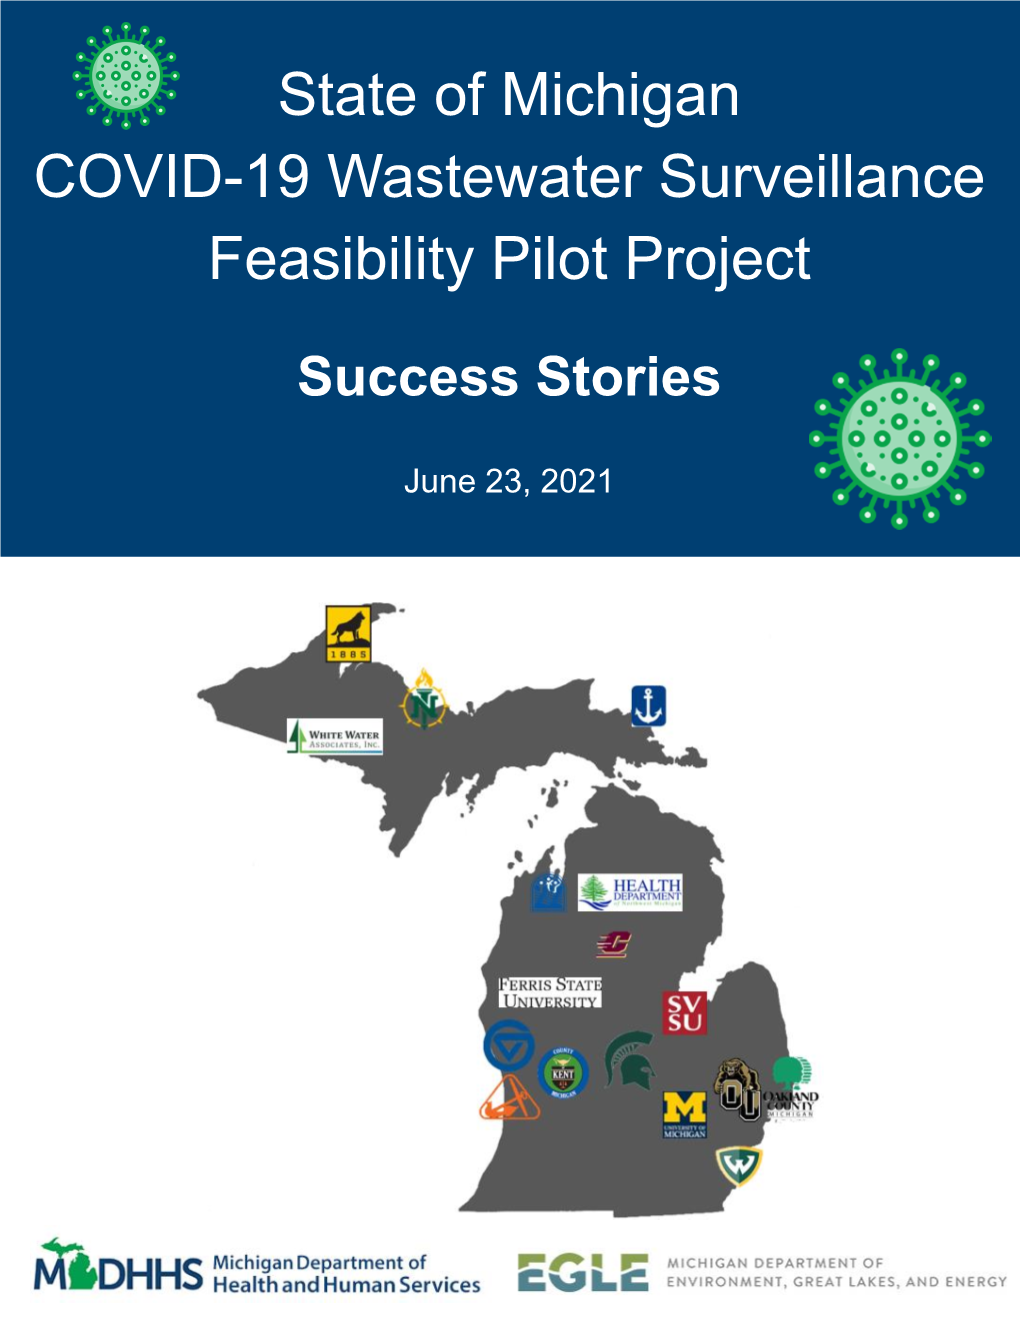 COVID-19 Wastewater Surveillance Feasibility Pilot Project